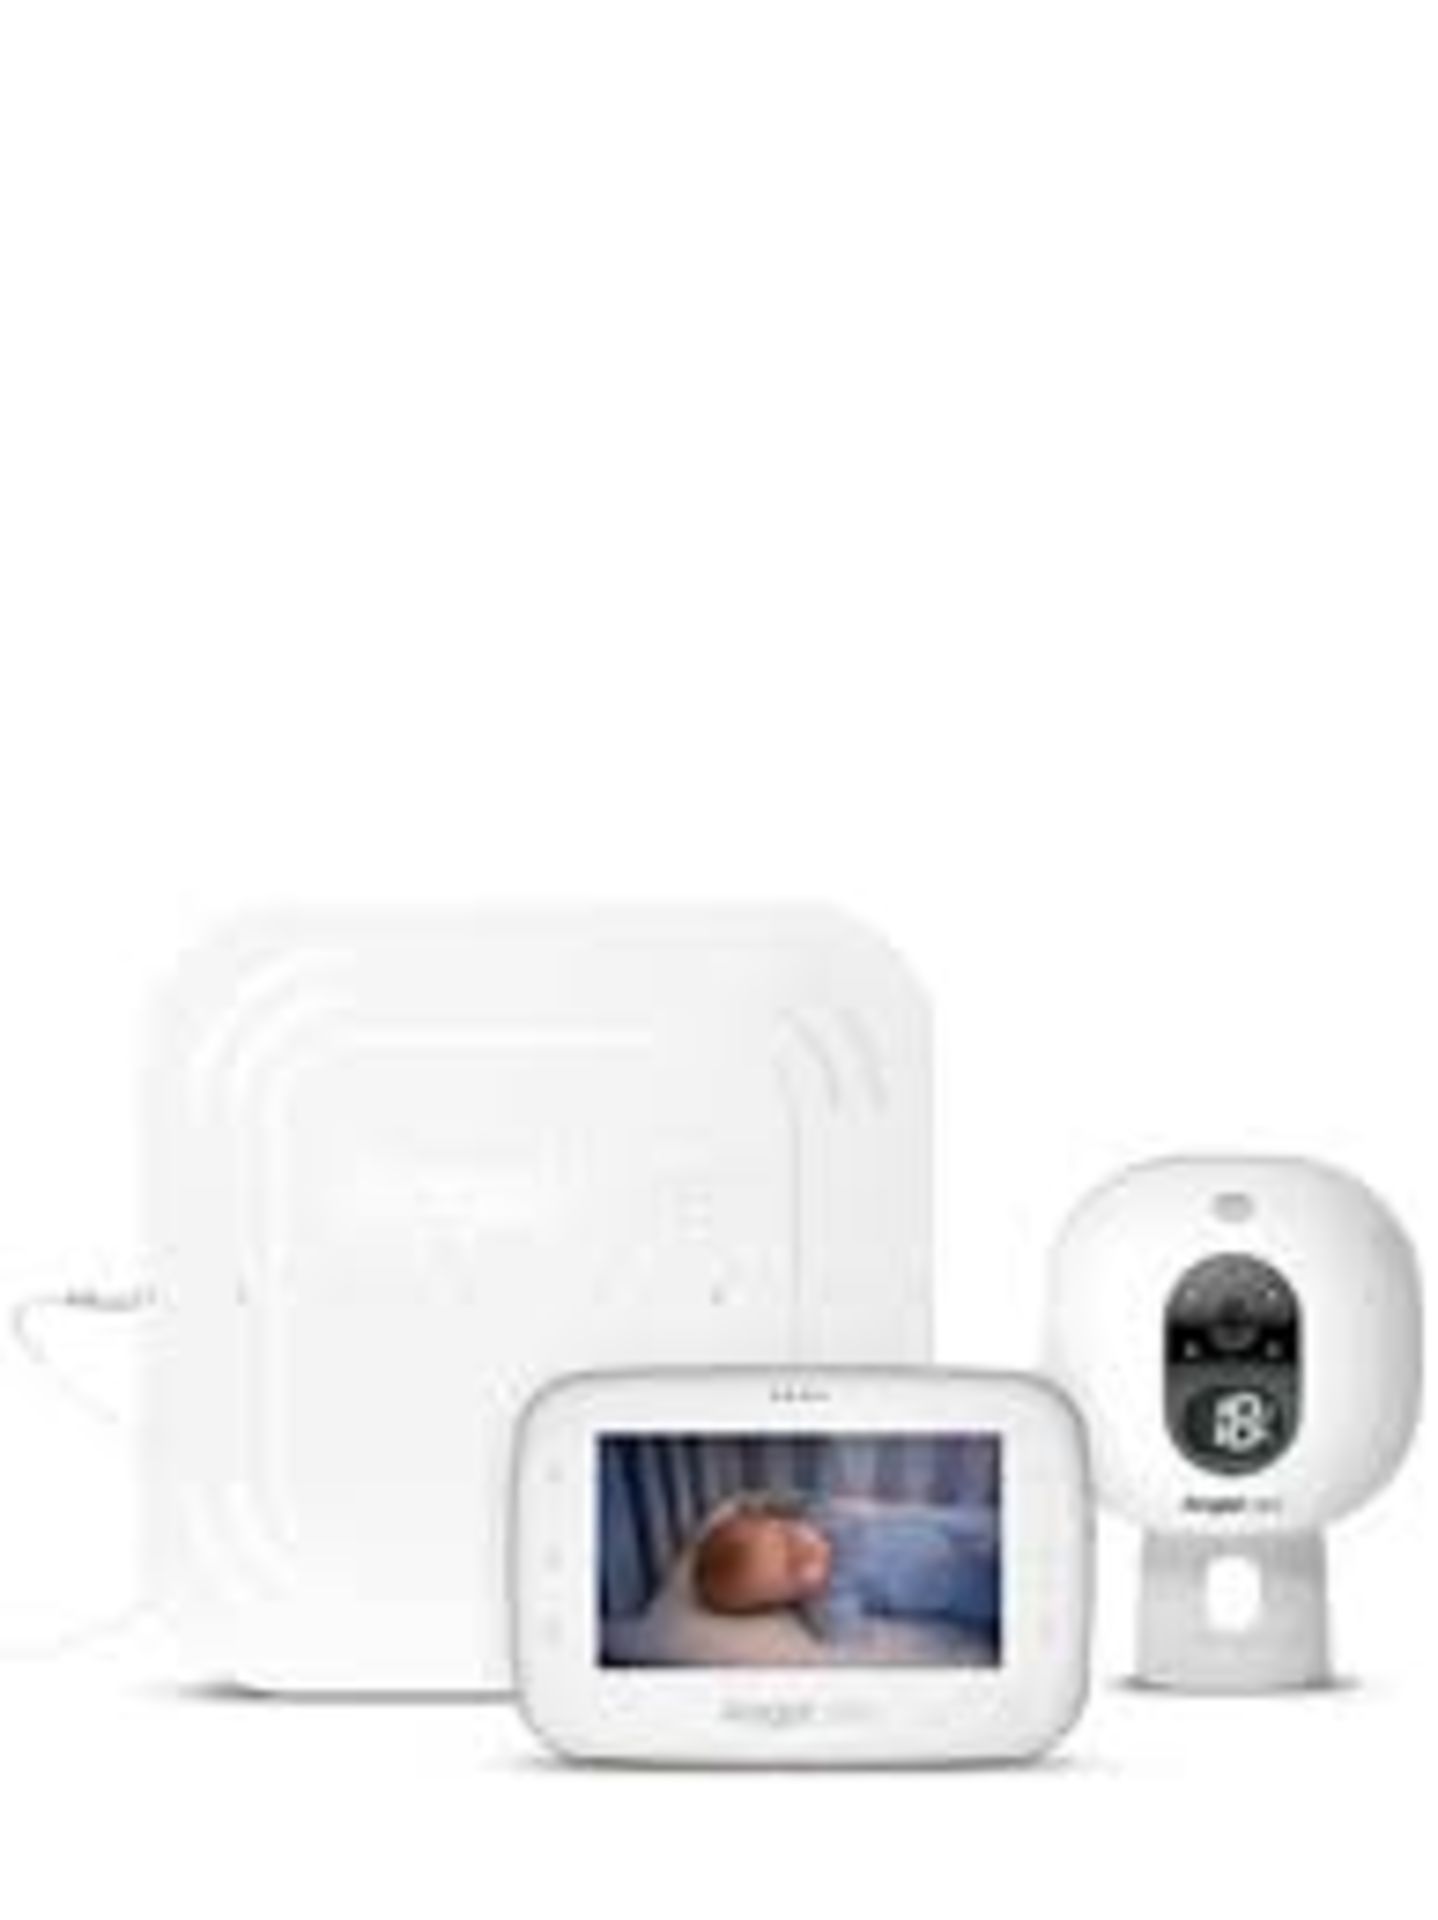 Boxed Angelcare Movement and Video Digital Baby Monitor System RRP £80 (3610885) (Public Viewing and